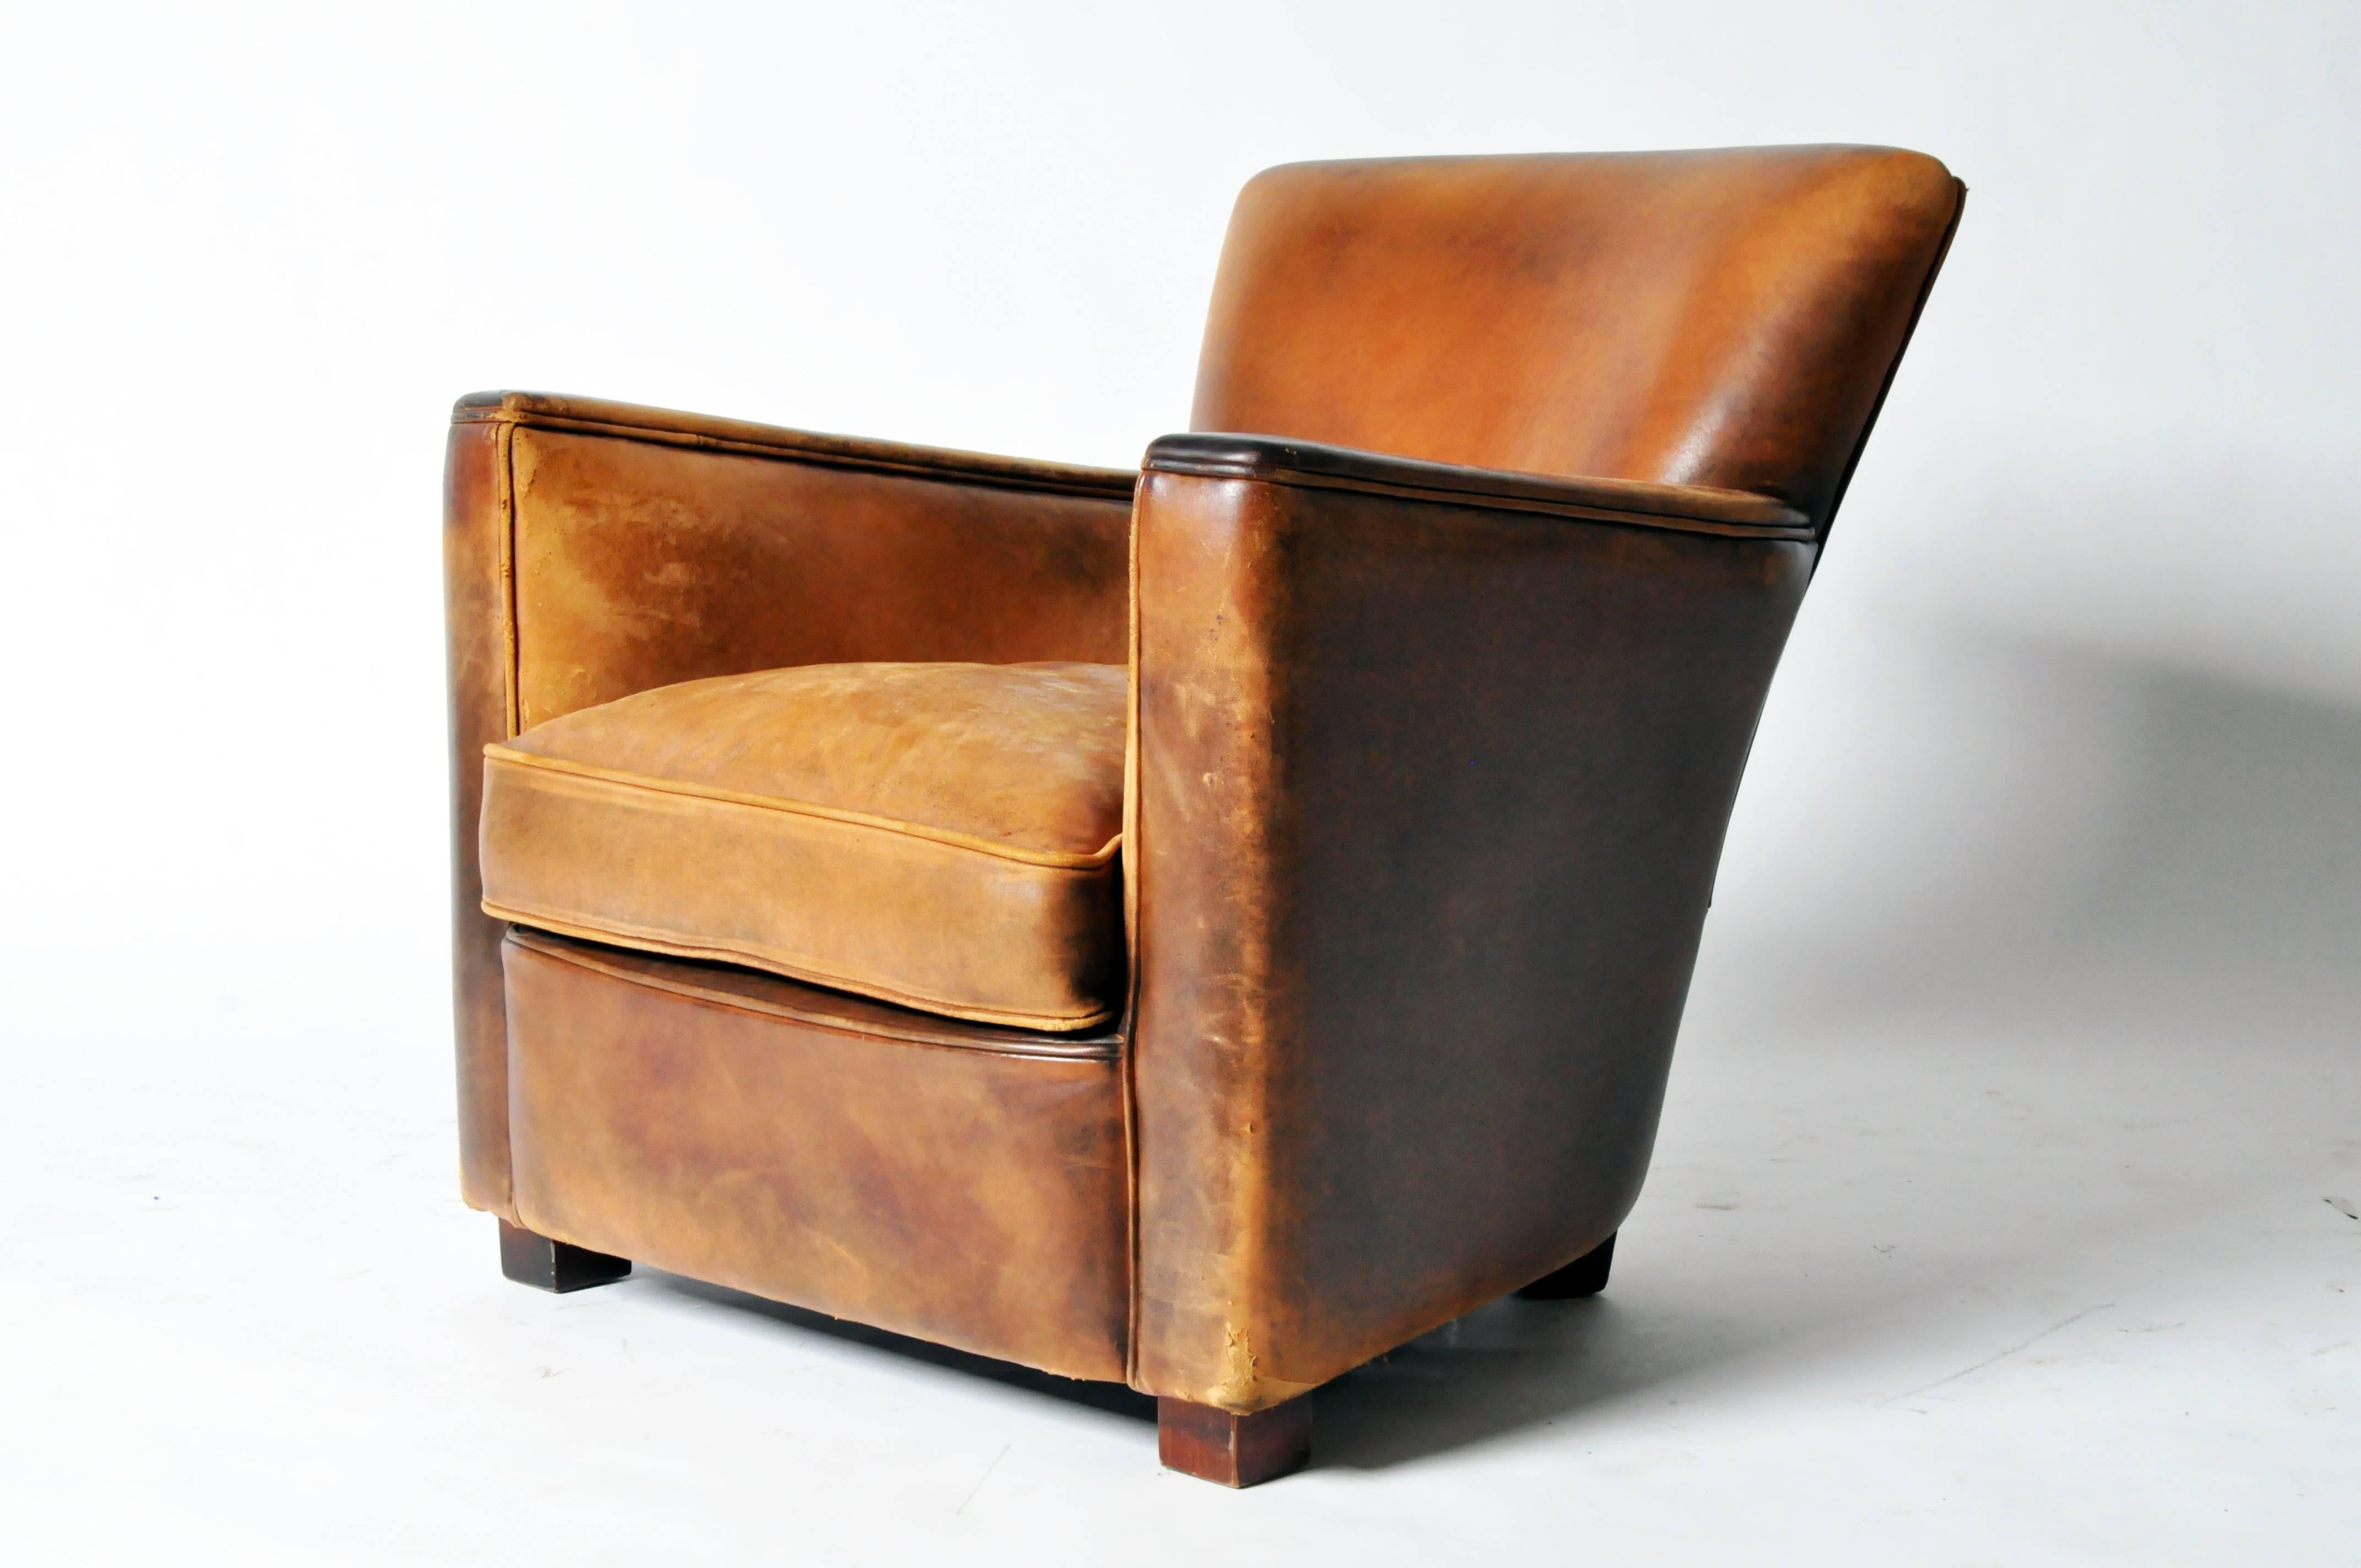 The slightly rounded back and straight track arms emphasize the clean-cut angles of this seat. The antiqued leather upholstery and compact size gives a nod to the classic silhouette it is modeled after.